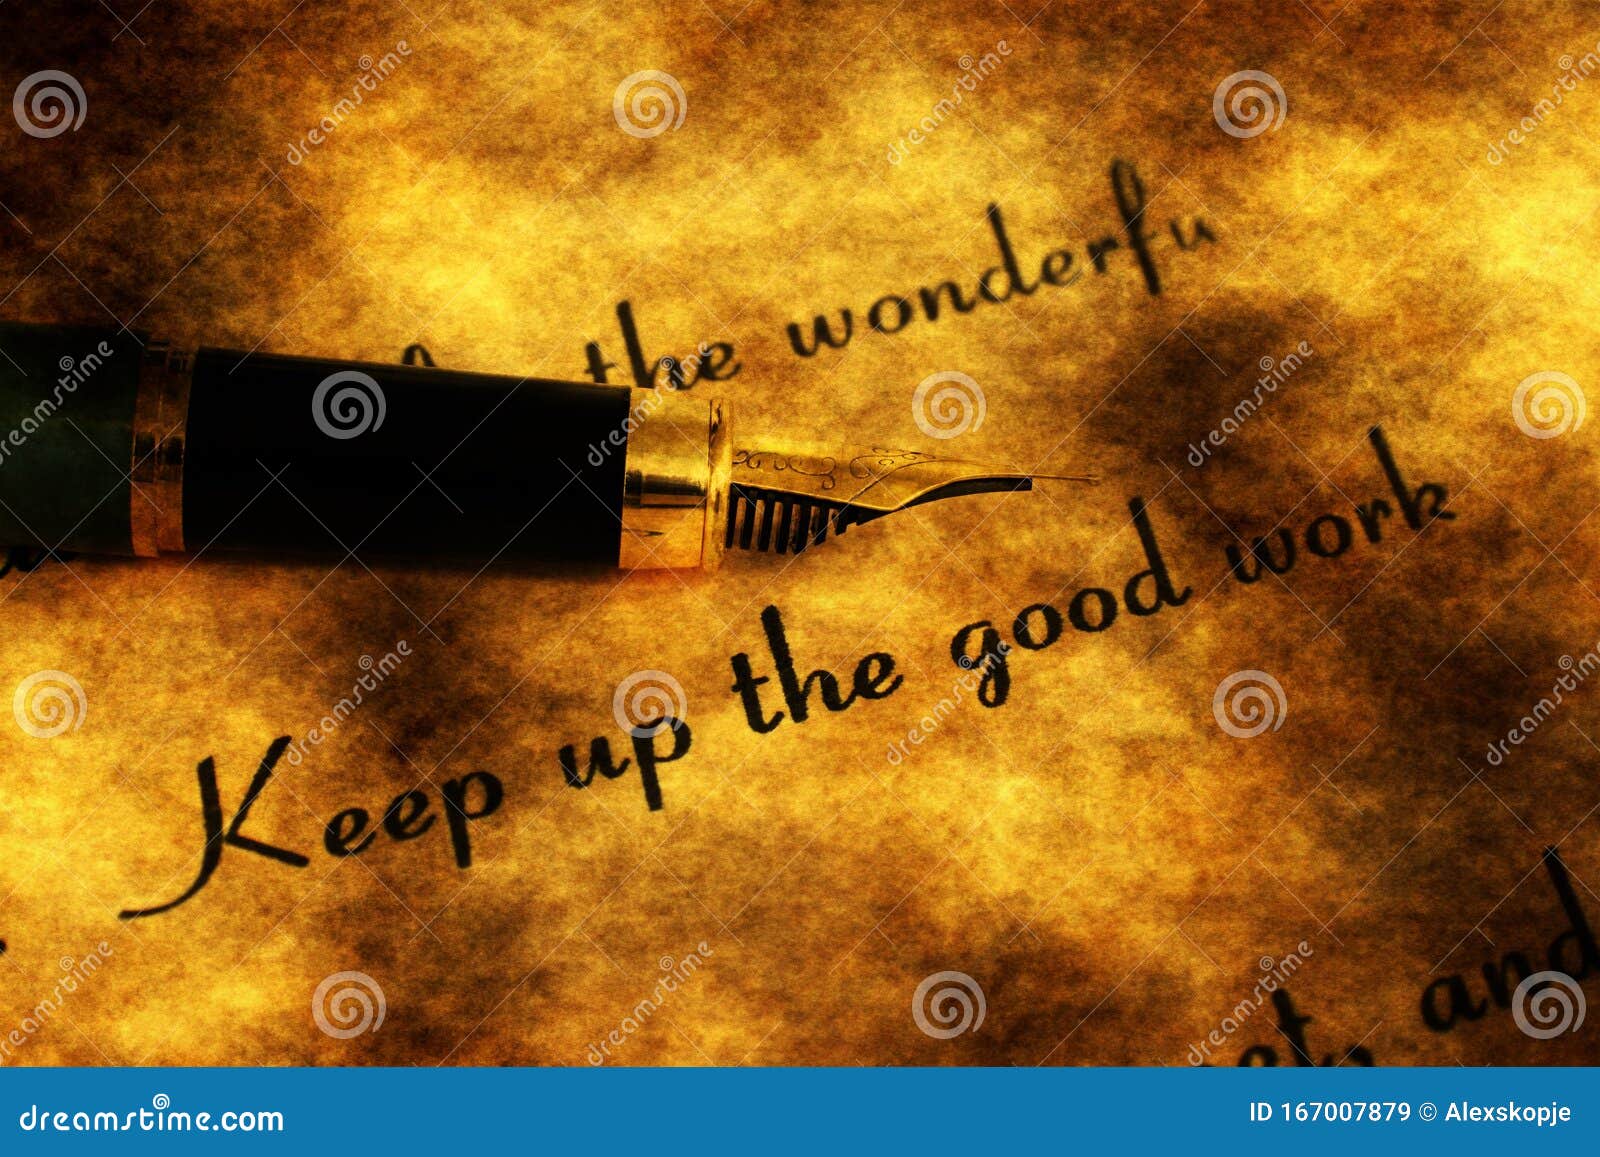 Keep up the good work picture. Keep up the good